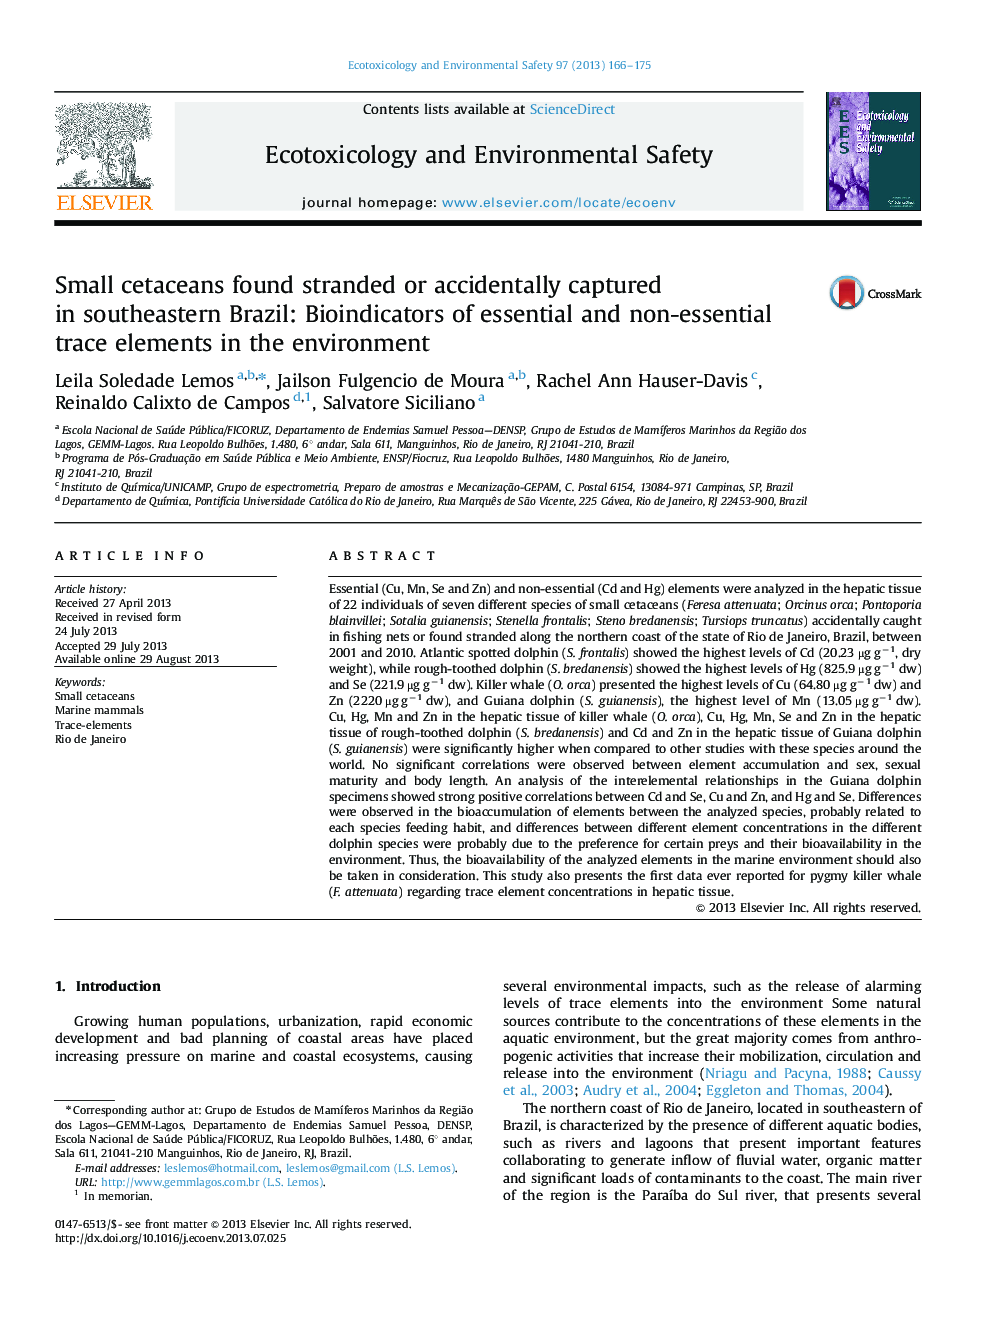 Small cetaceans found stranded or accidentally captured in southeastern Brazil: Bioindicators of essential and non-essential trace elements in the environment